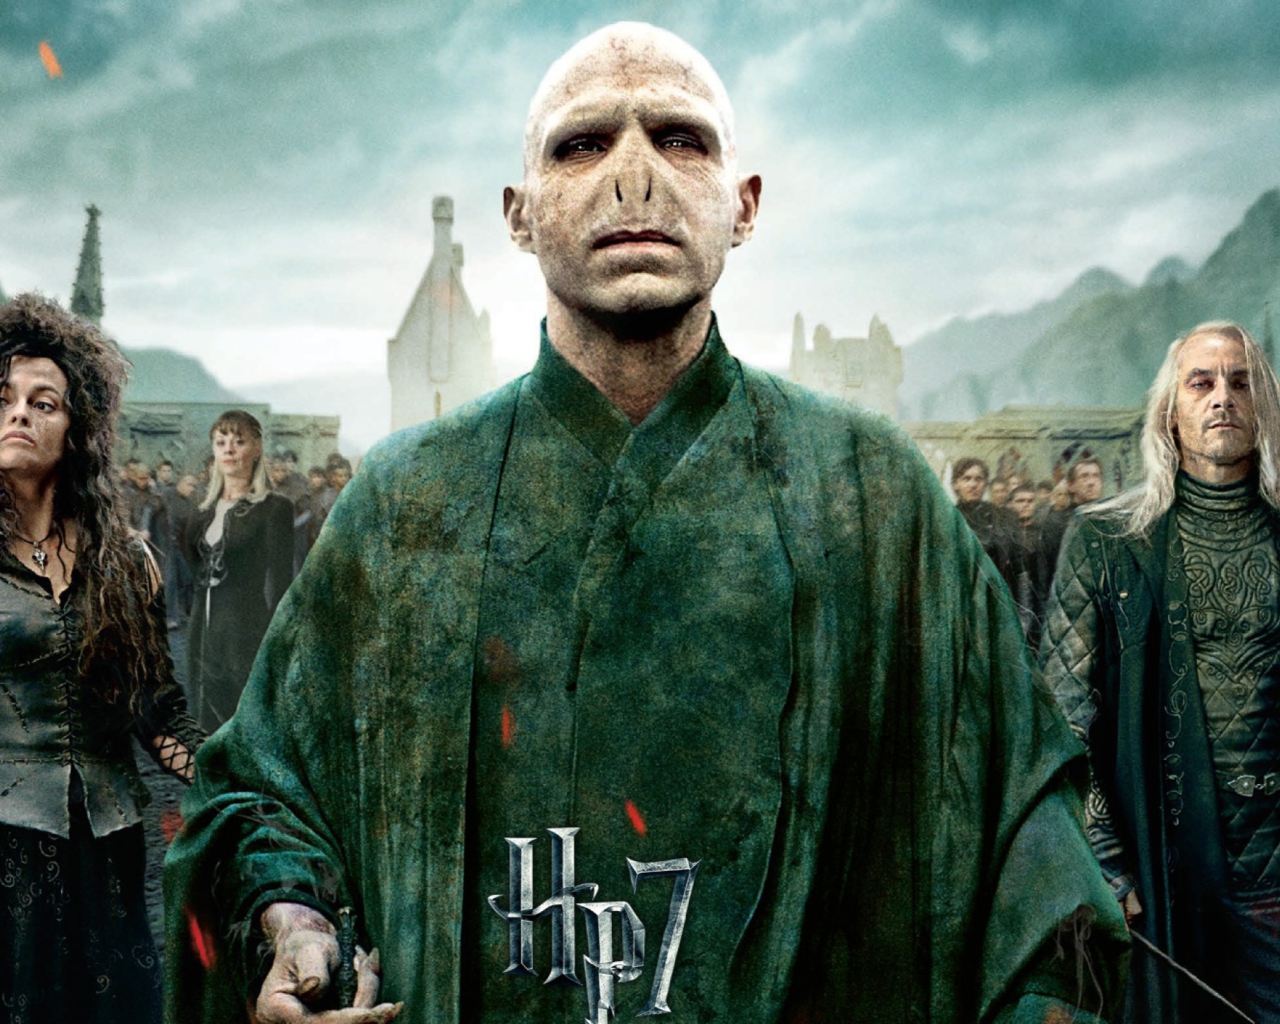 Harry Potter And The Deathly Hallows Part 2 screenshot #1 1280x1024